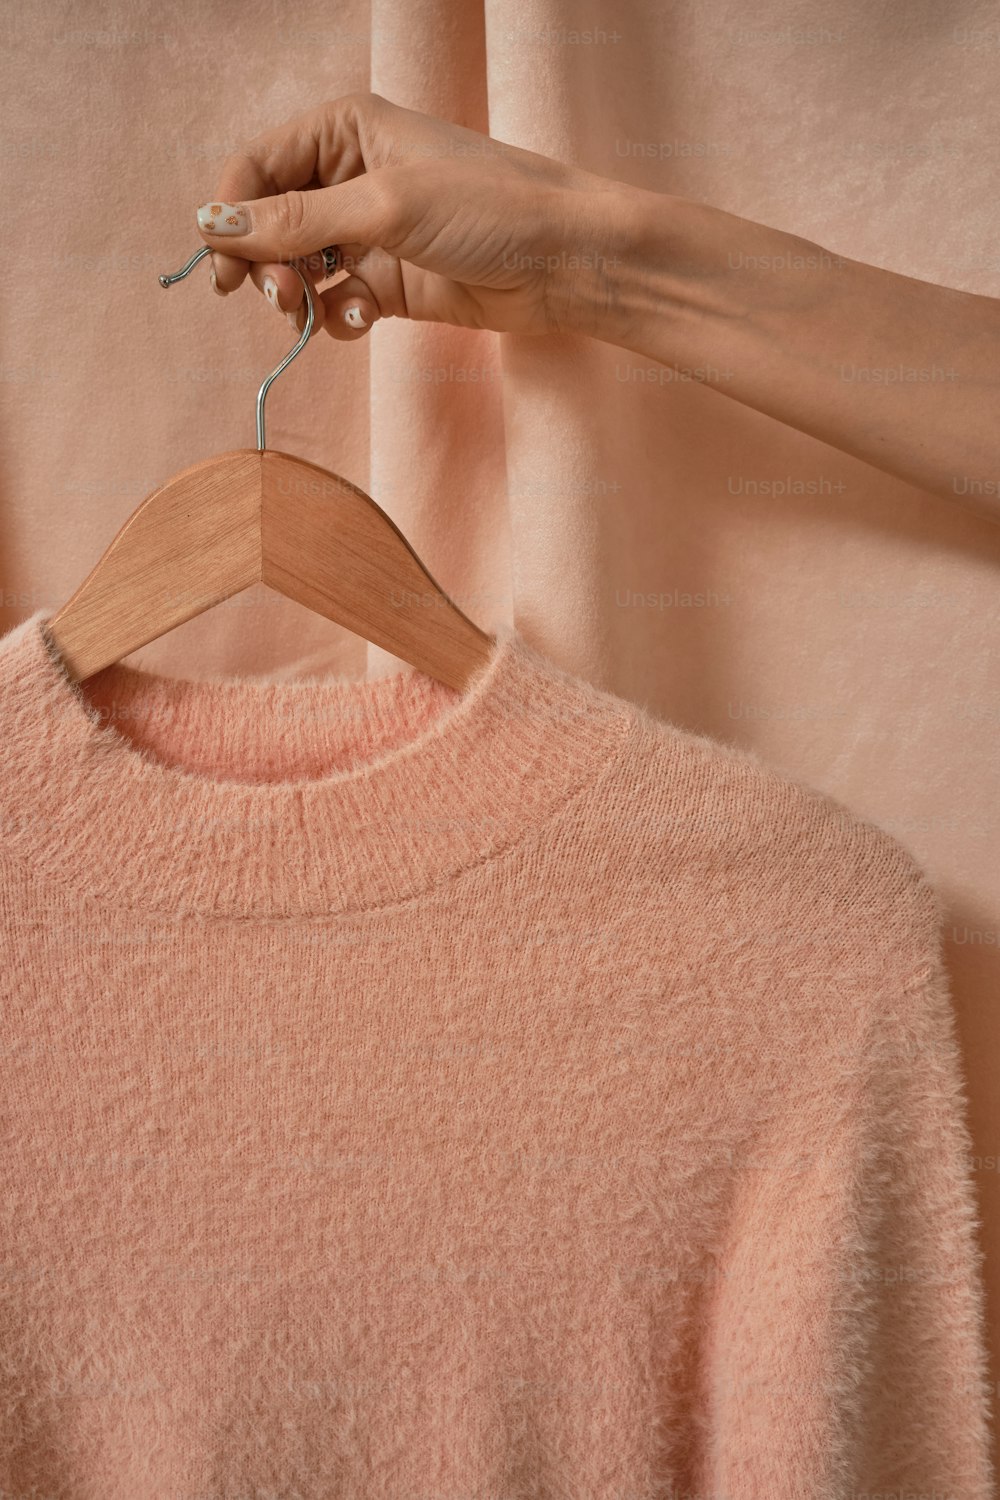 a woman's hand holding a wooden hanger over a pink sweater